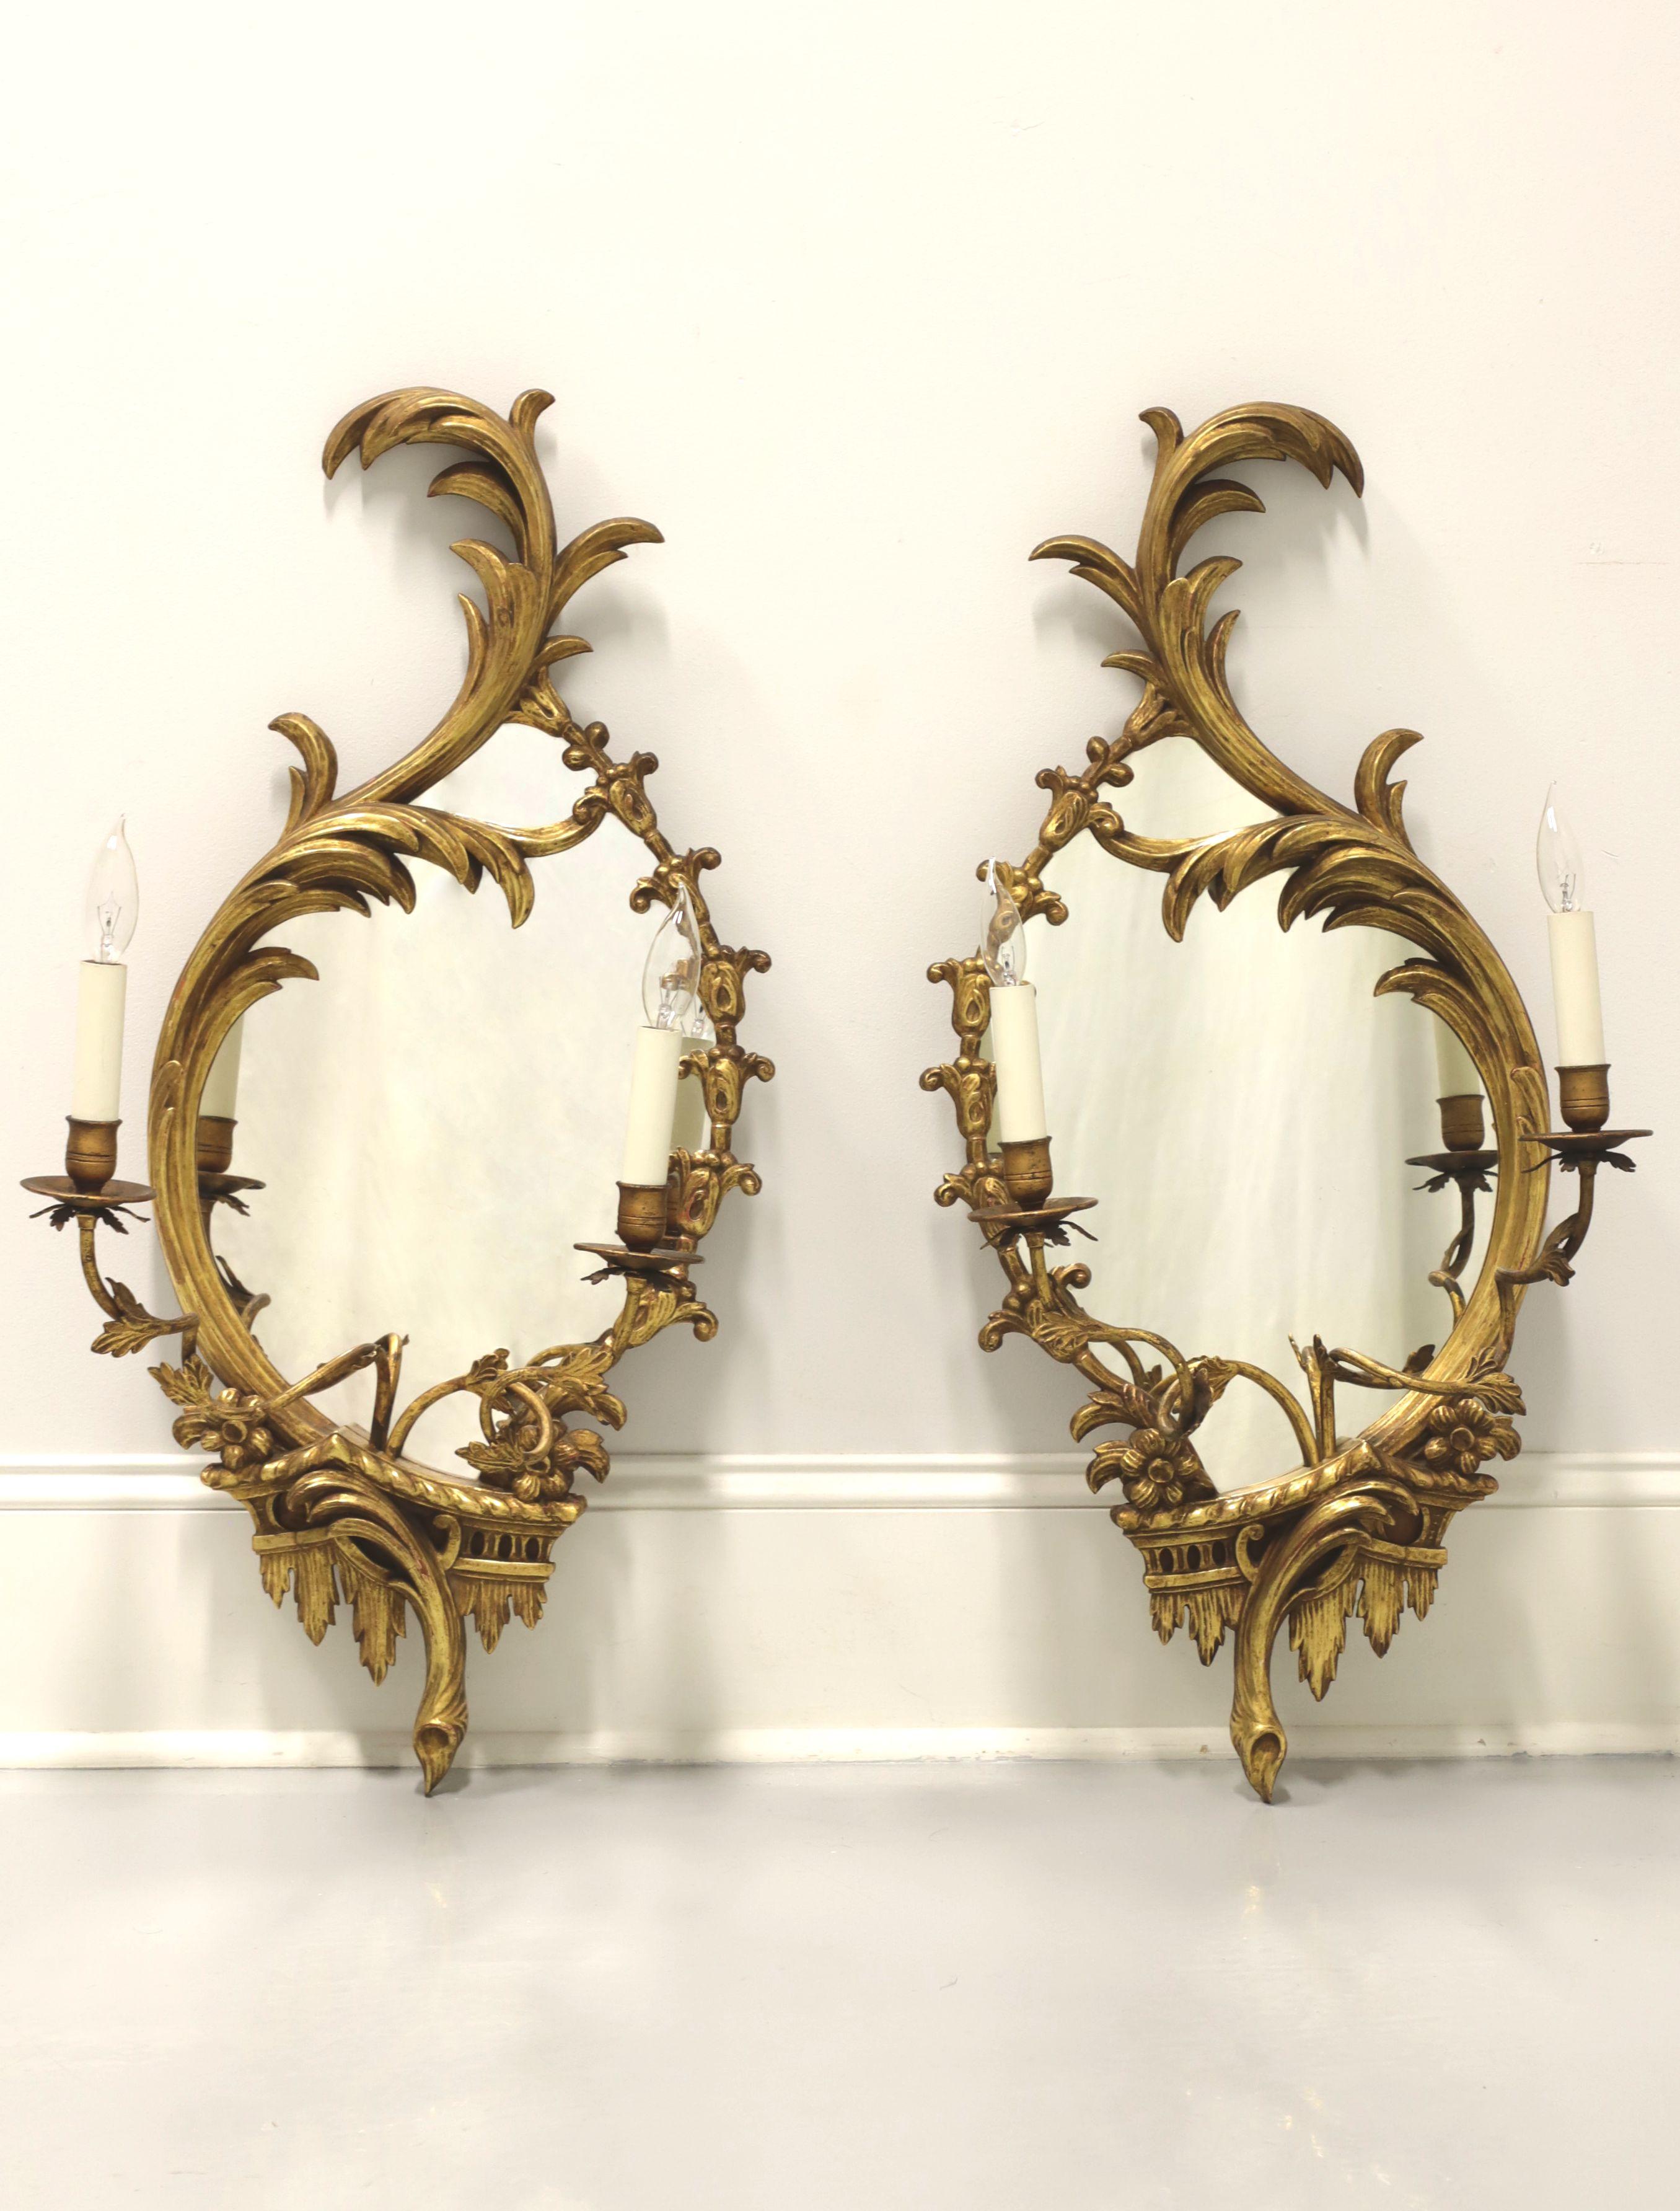 Early 20th Century Carved Wood Electrified Candle Mirror Wall Sconces - Pair A 3